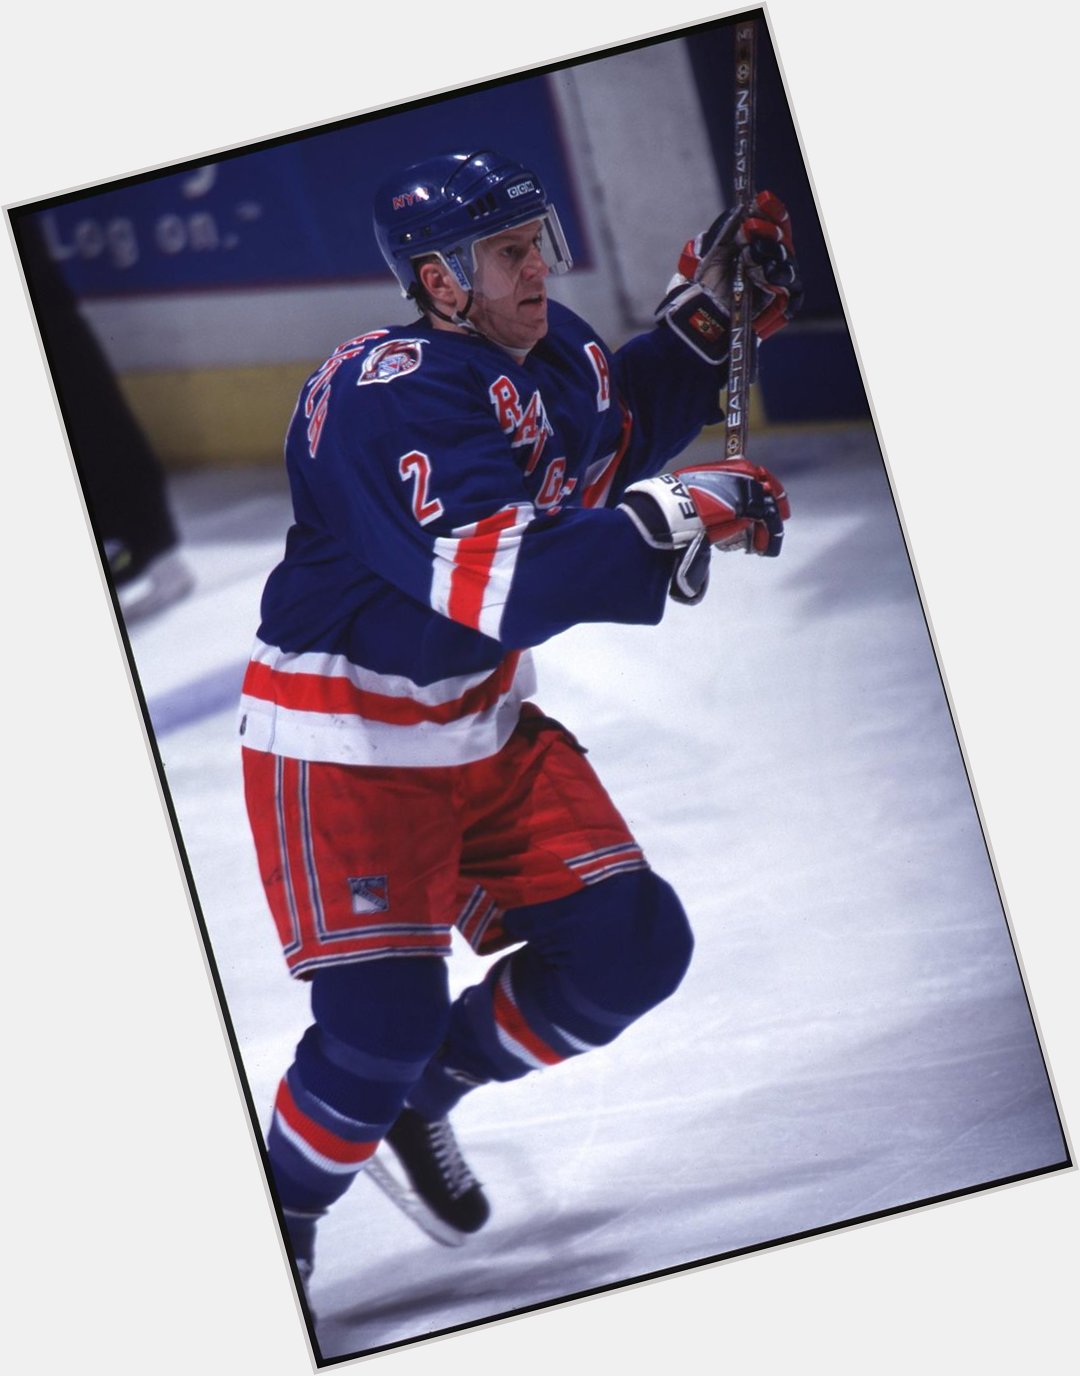 Happy birthday to arguably the best US born defenseman in history and great, Brian Leetch. 